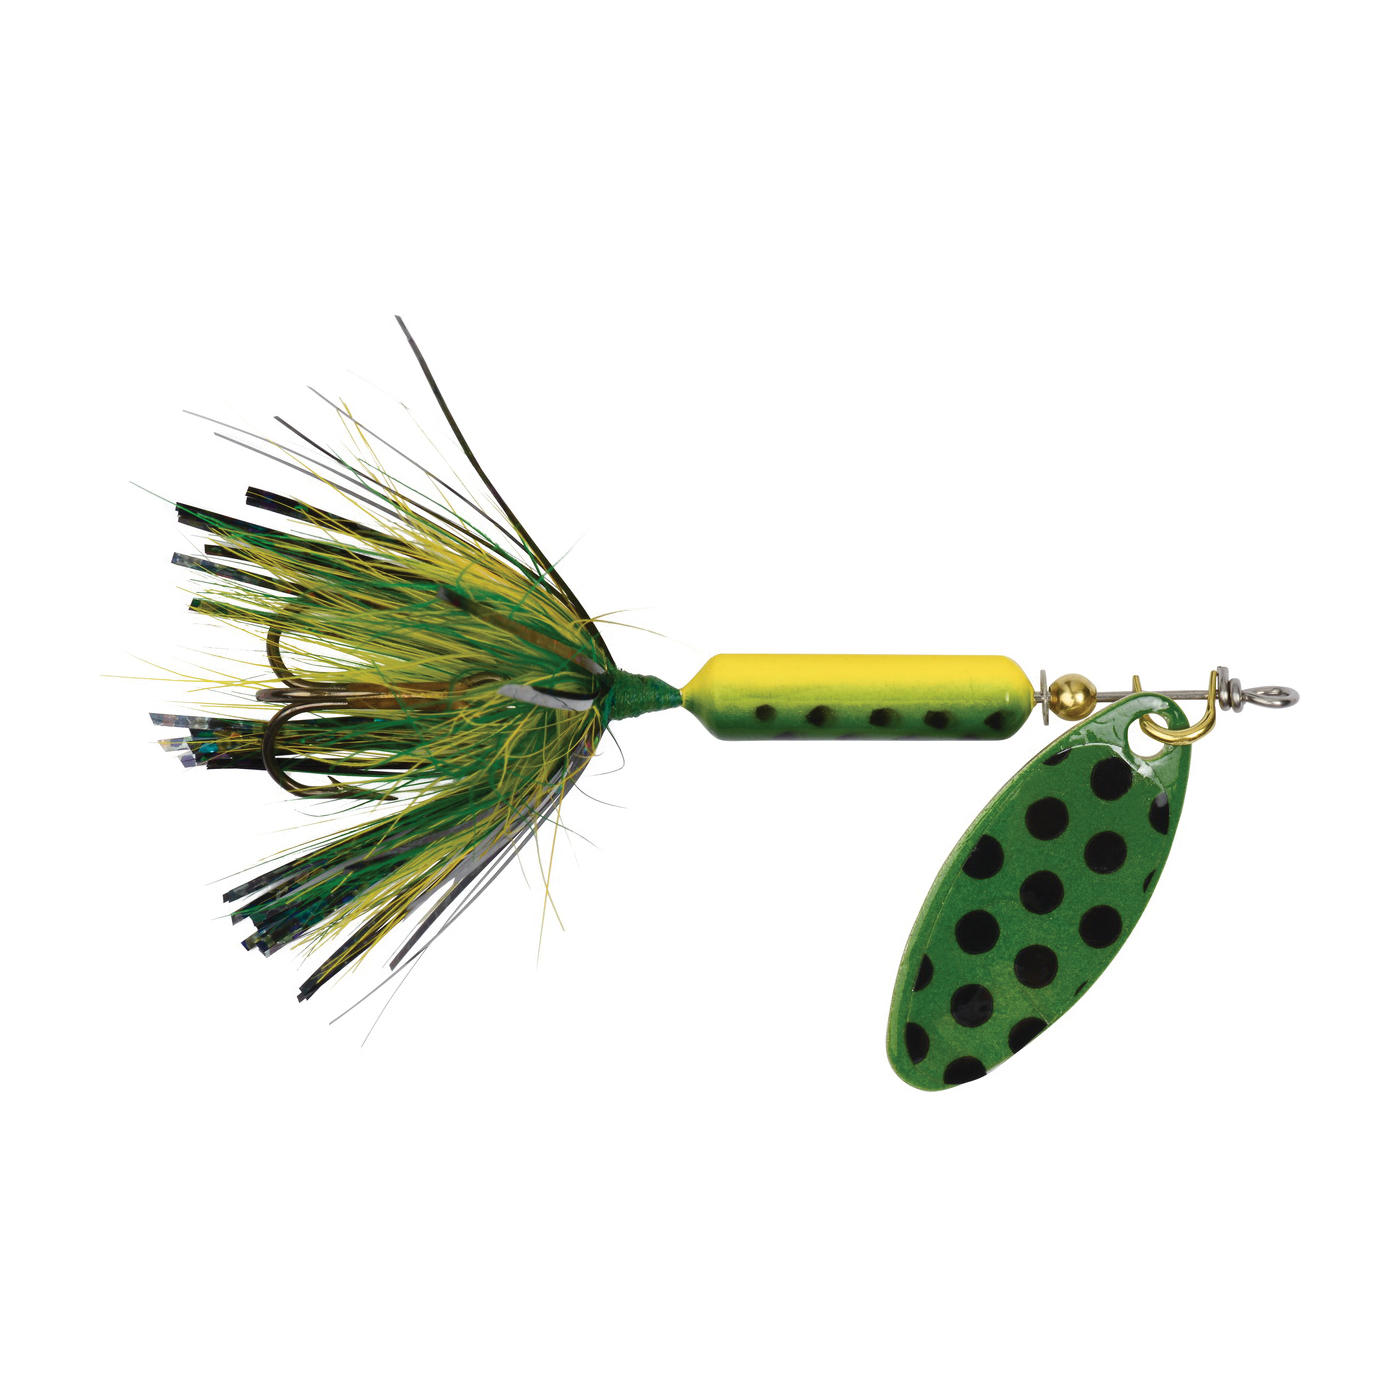 Worden's 208FRSP Fishing Lure, Bass, Crappie, Perch, Trout, Frog Spot Lure - 1